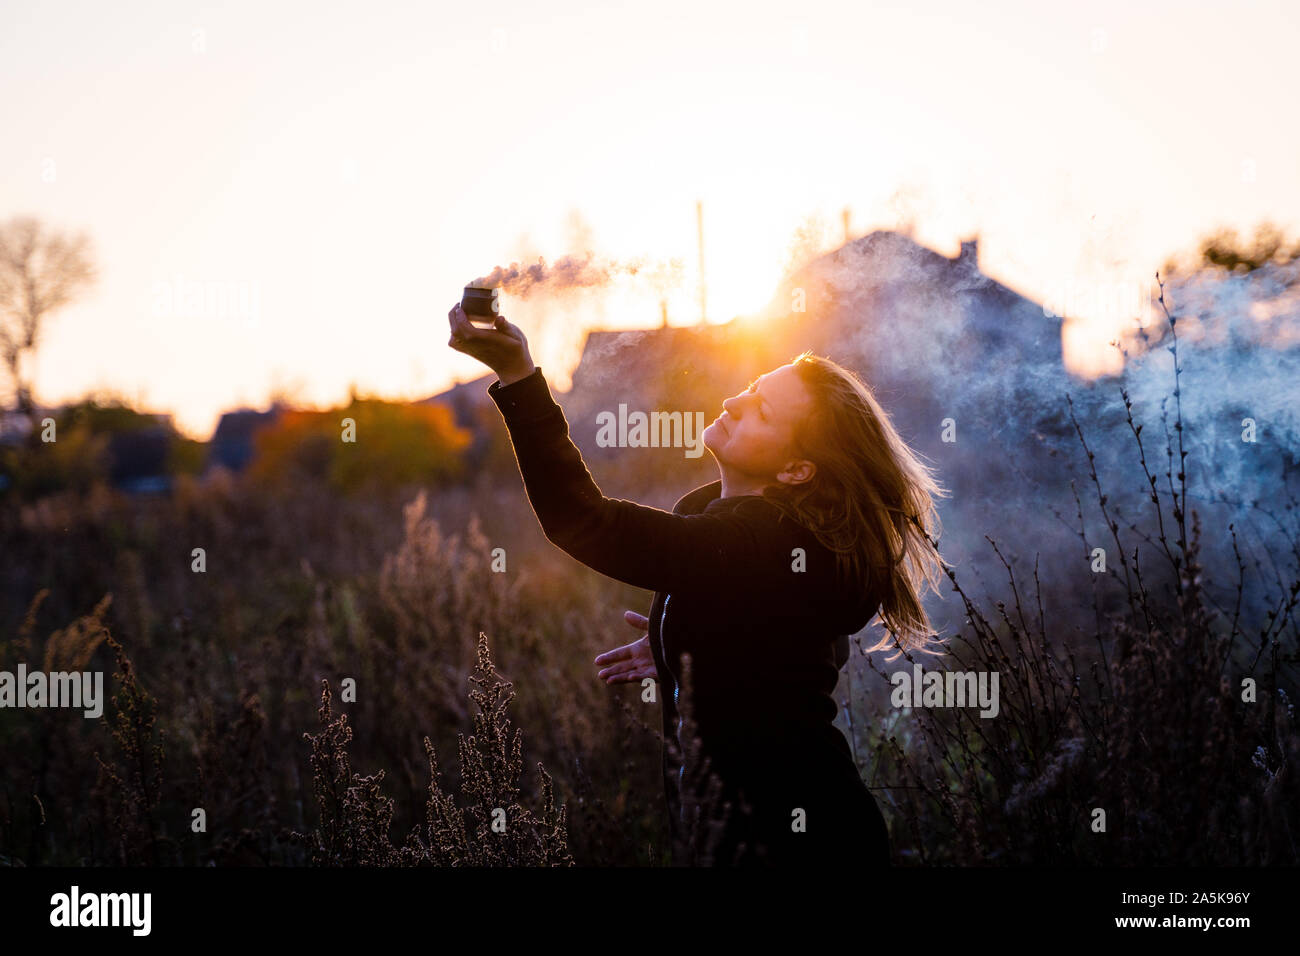 woman with long hair holds a smoking bowl in her hand, profile portrait at sunset. allegory of magic. Stock Photo